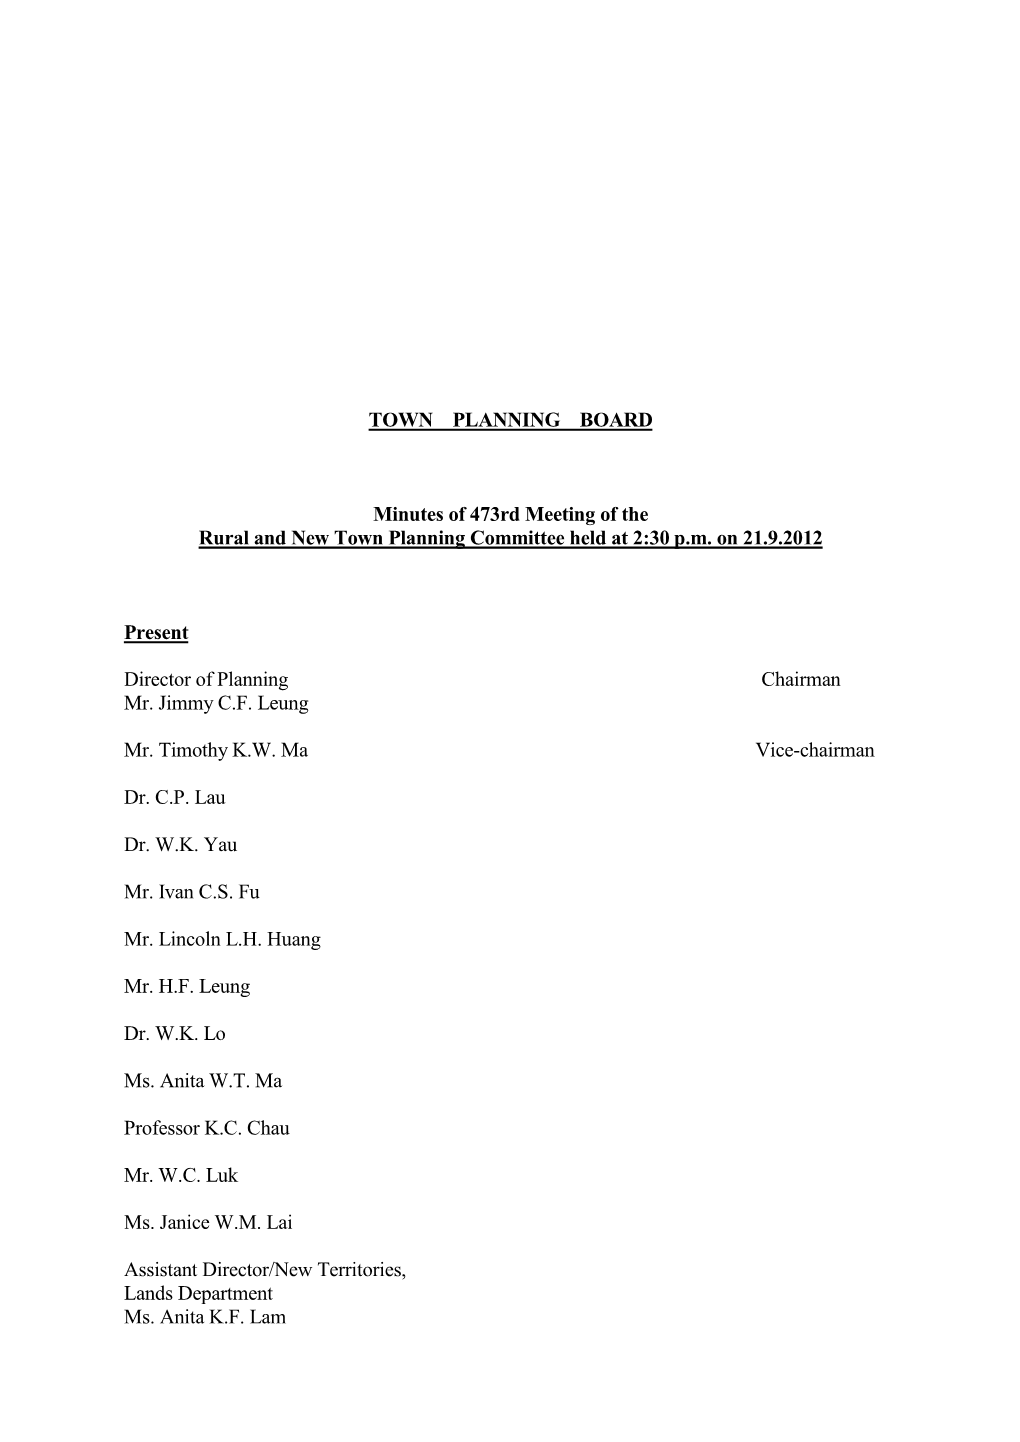 TOWN PLANNING BOARD Minutes of 473Rd Meeting of the Rural And